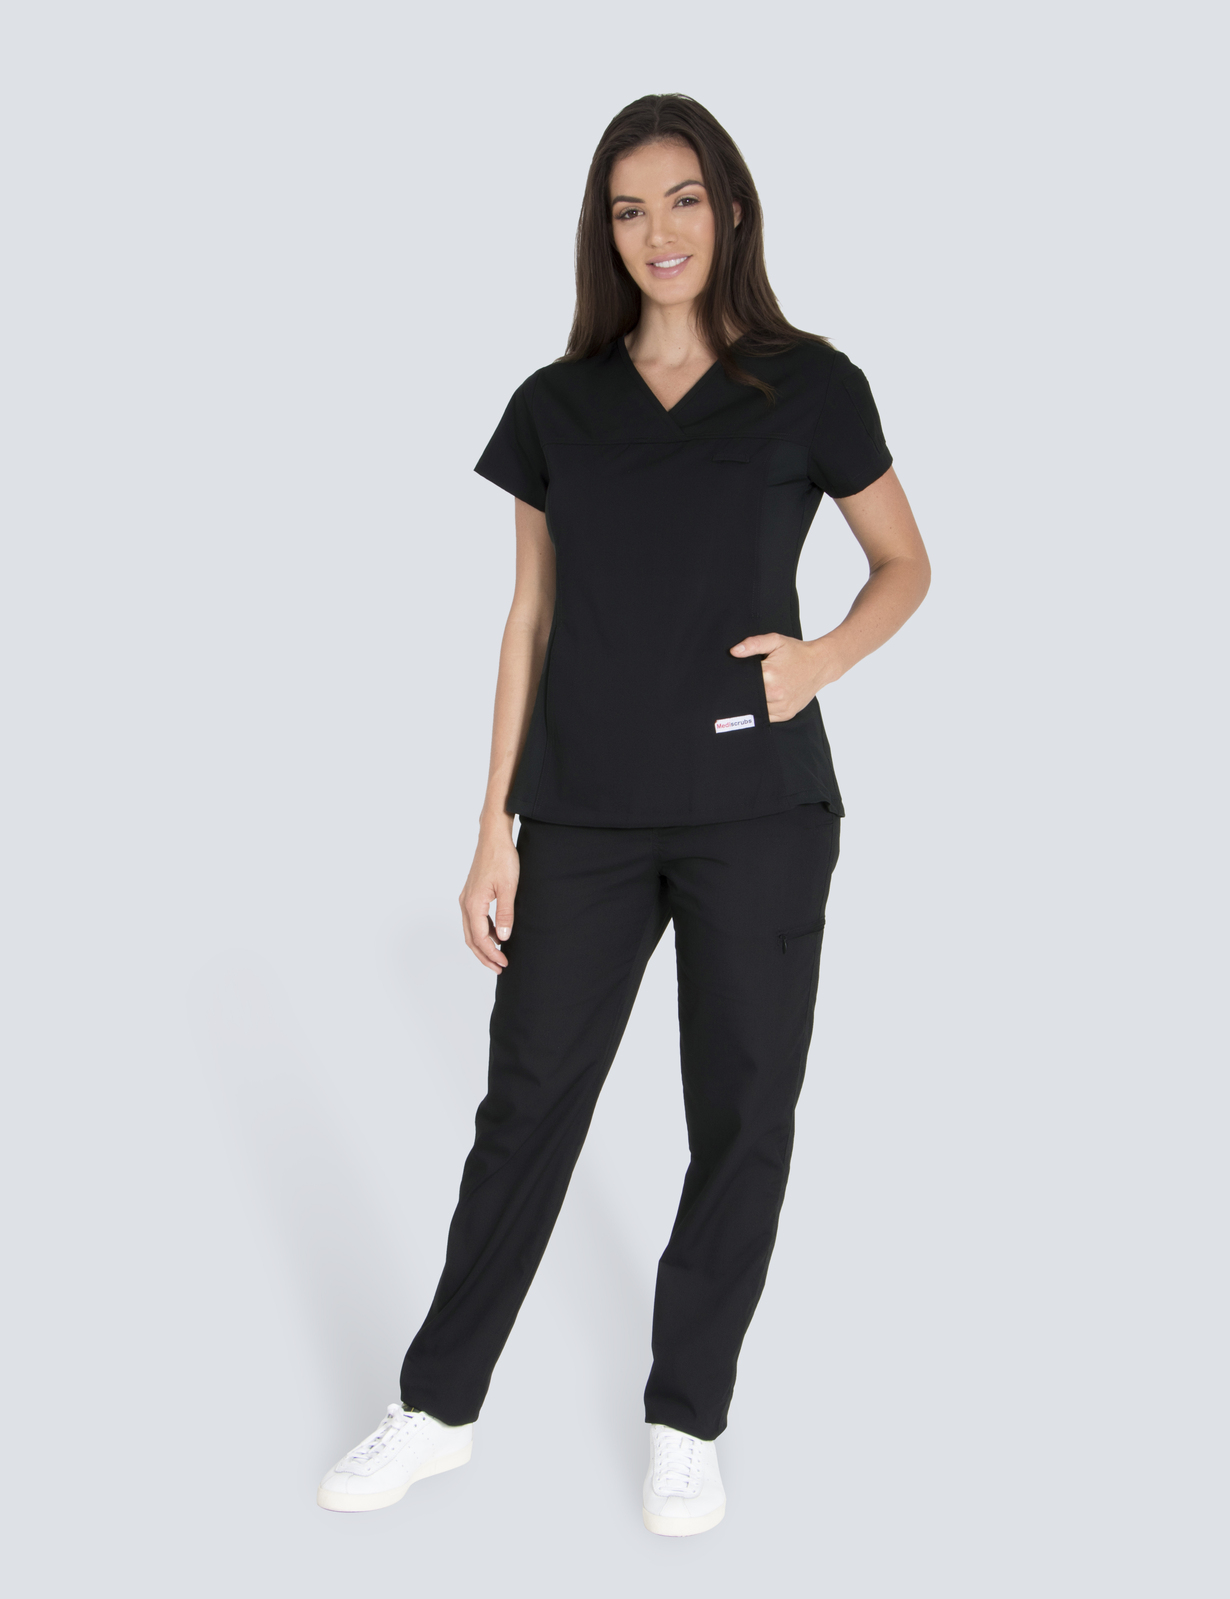 Prince Charles Hospital - Medical Imaging (Women's Fit Spandex and Cargo Pants in Black incl Logos)